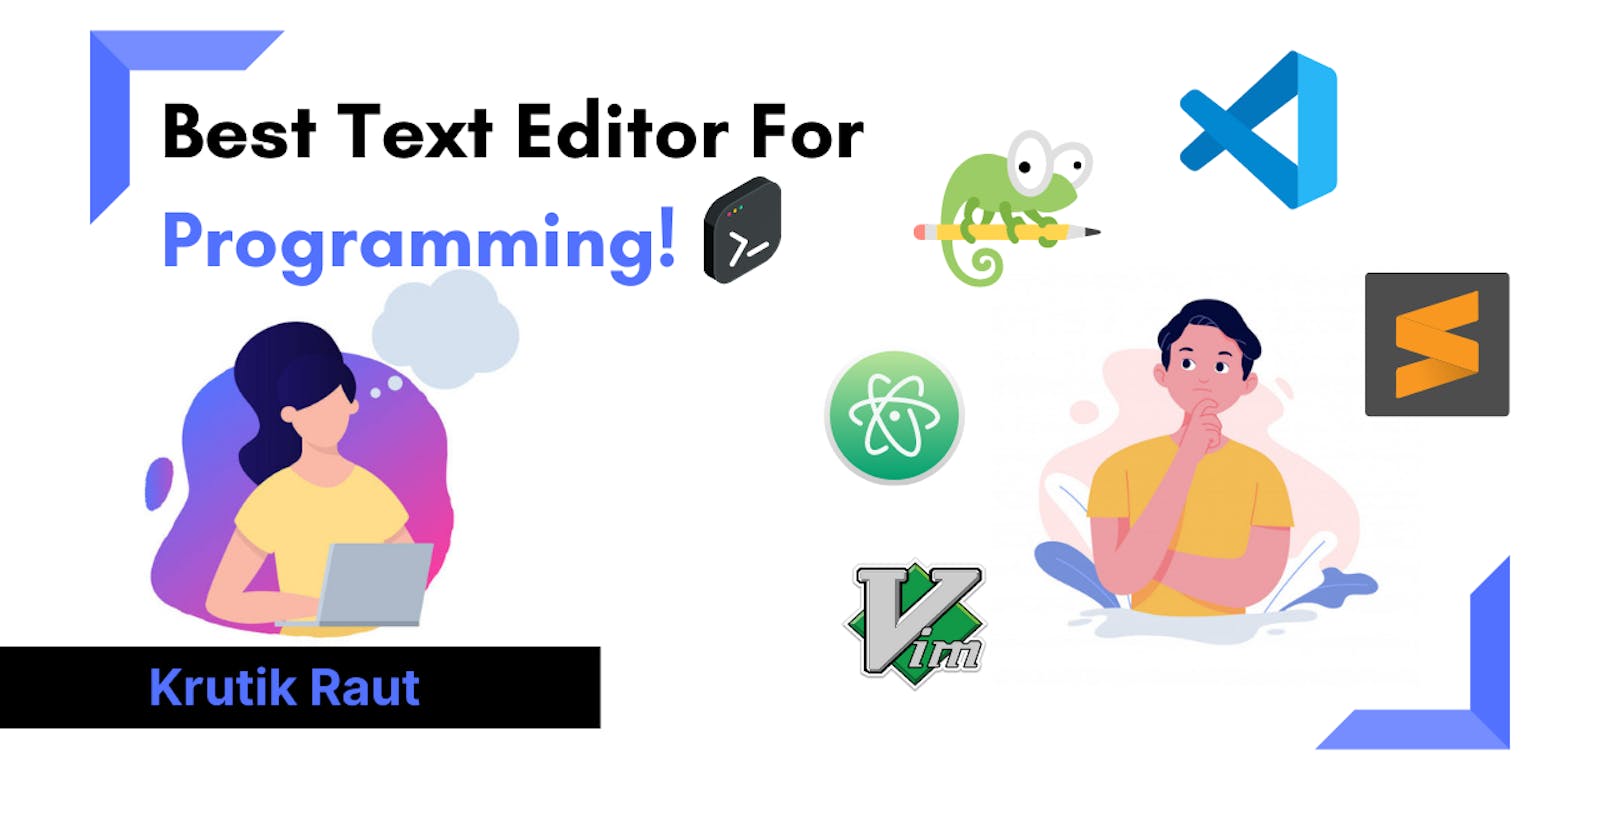 Best Text Editor For Programming